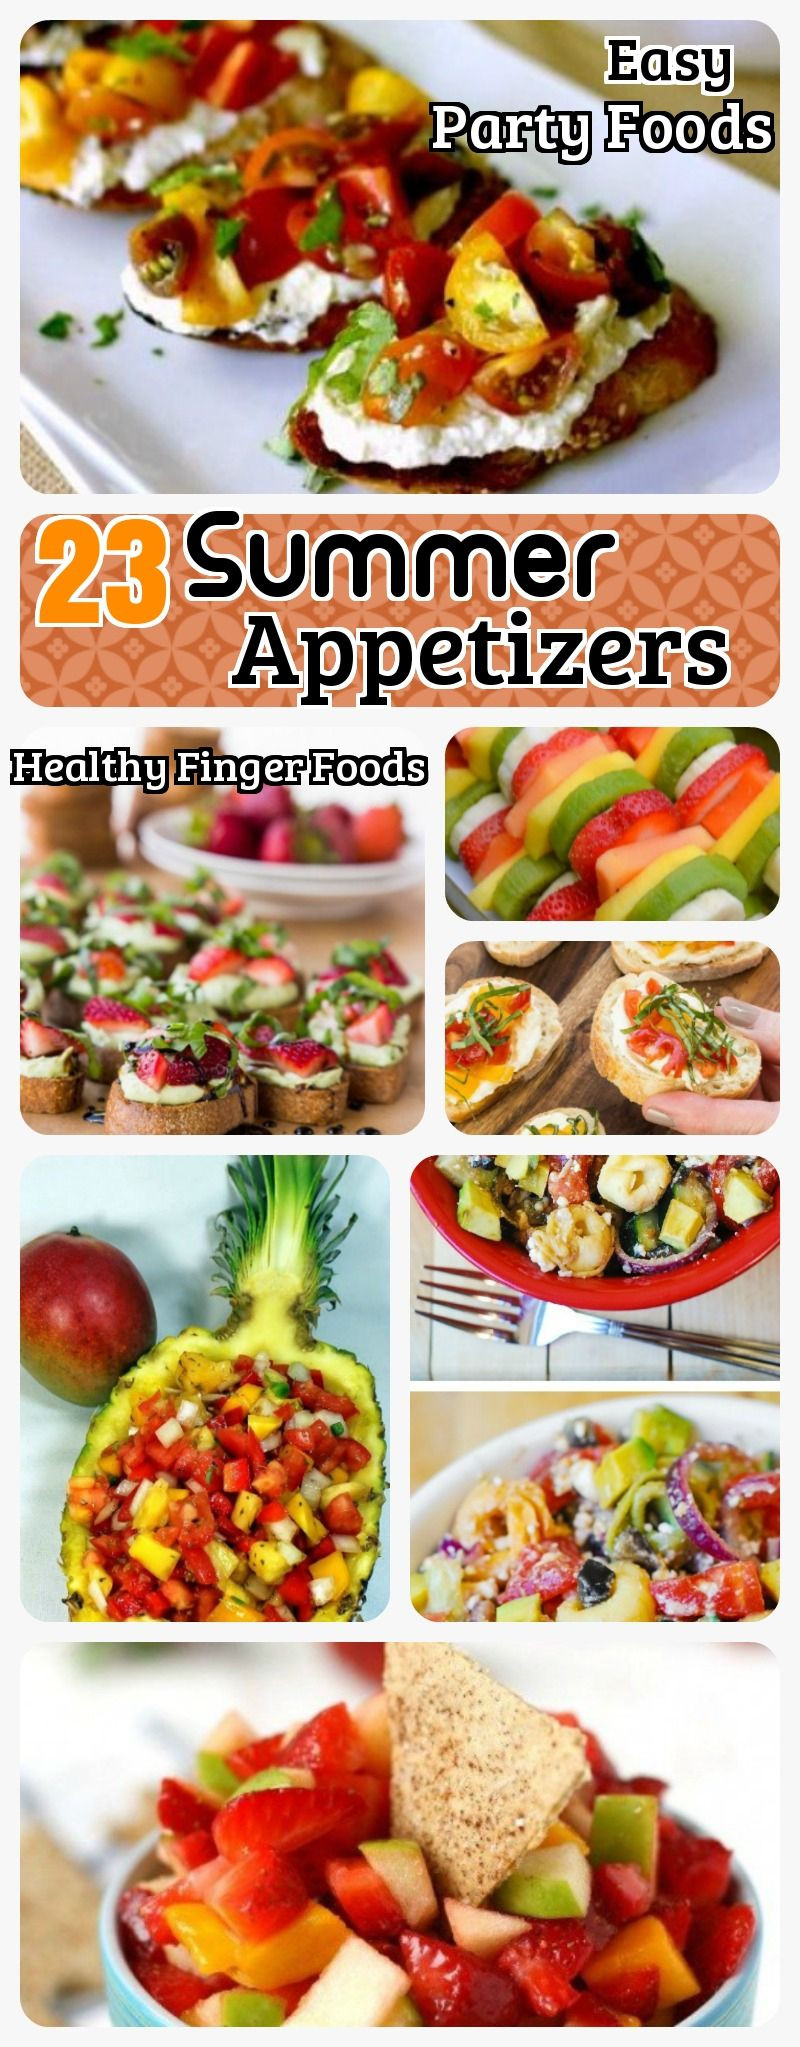 Summer Appetizers Finger Food
 23 Summer appetizers for Scorching Summer Easy Healthy